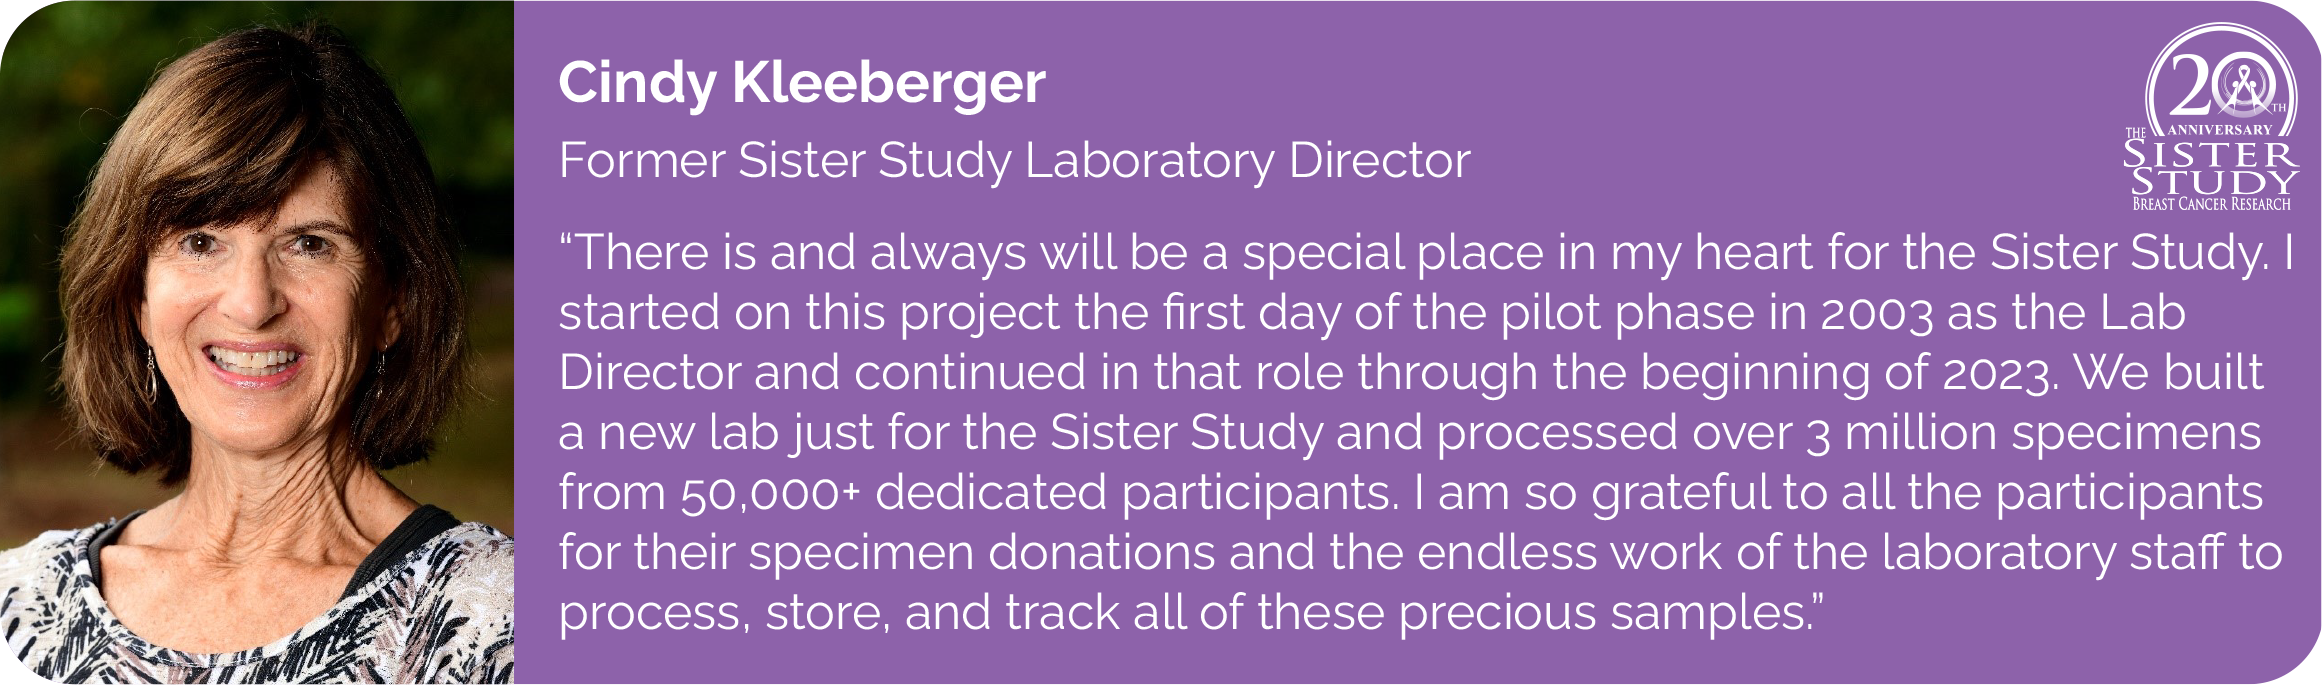 Cindy Kleeberger
Former Sister Study Laboratory Director
- There is and always will be a special place in my heart for the Sister Study. I started on this project the first day of the pilot phase in 2003 as the Lab Director and continued in that role through the beginning of 2023. We built a new lab just for the Sister Study and processed over 3 million specimens from 50,000+ dedicated participants. I am so grateful to all the participants for their specimen donations and the endless work of the laboratory staff to process, store, and track all of these precious samples.